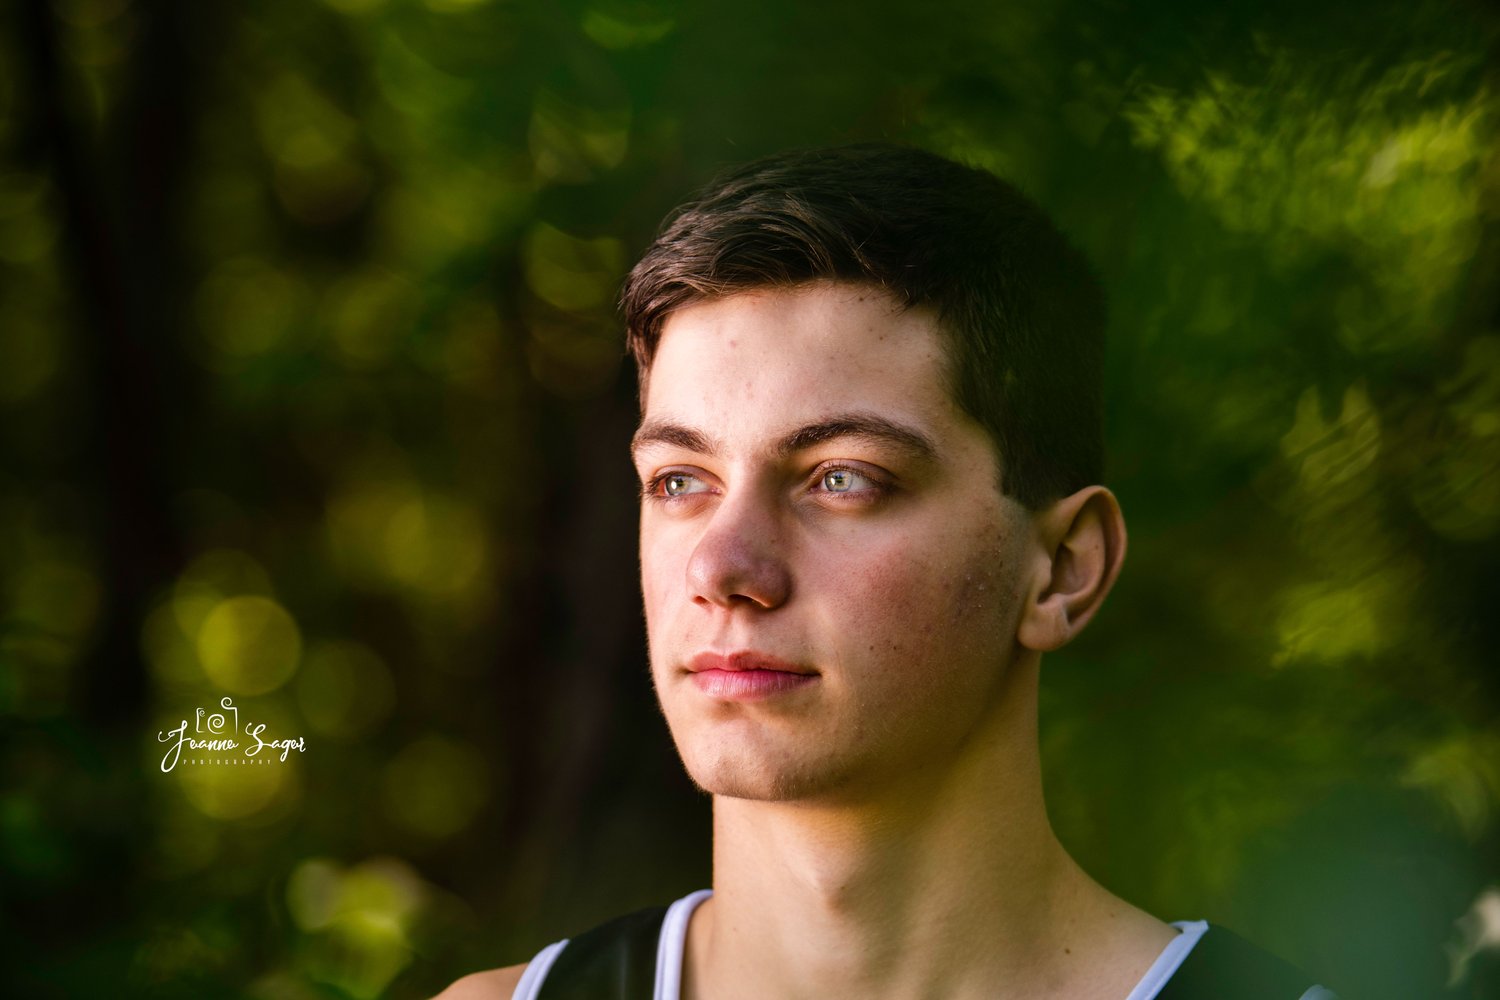 a portrait of a teenage boy up close against a backdrop of greenery